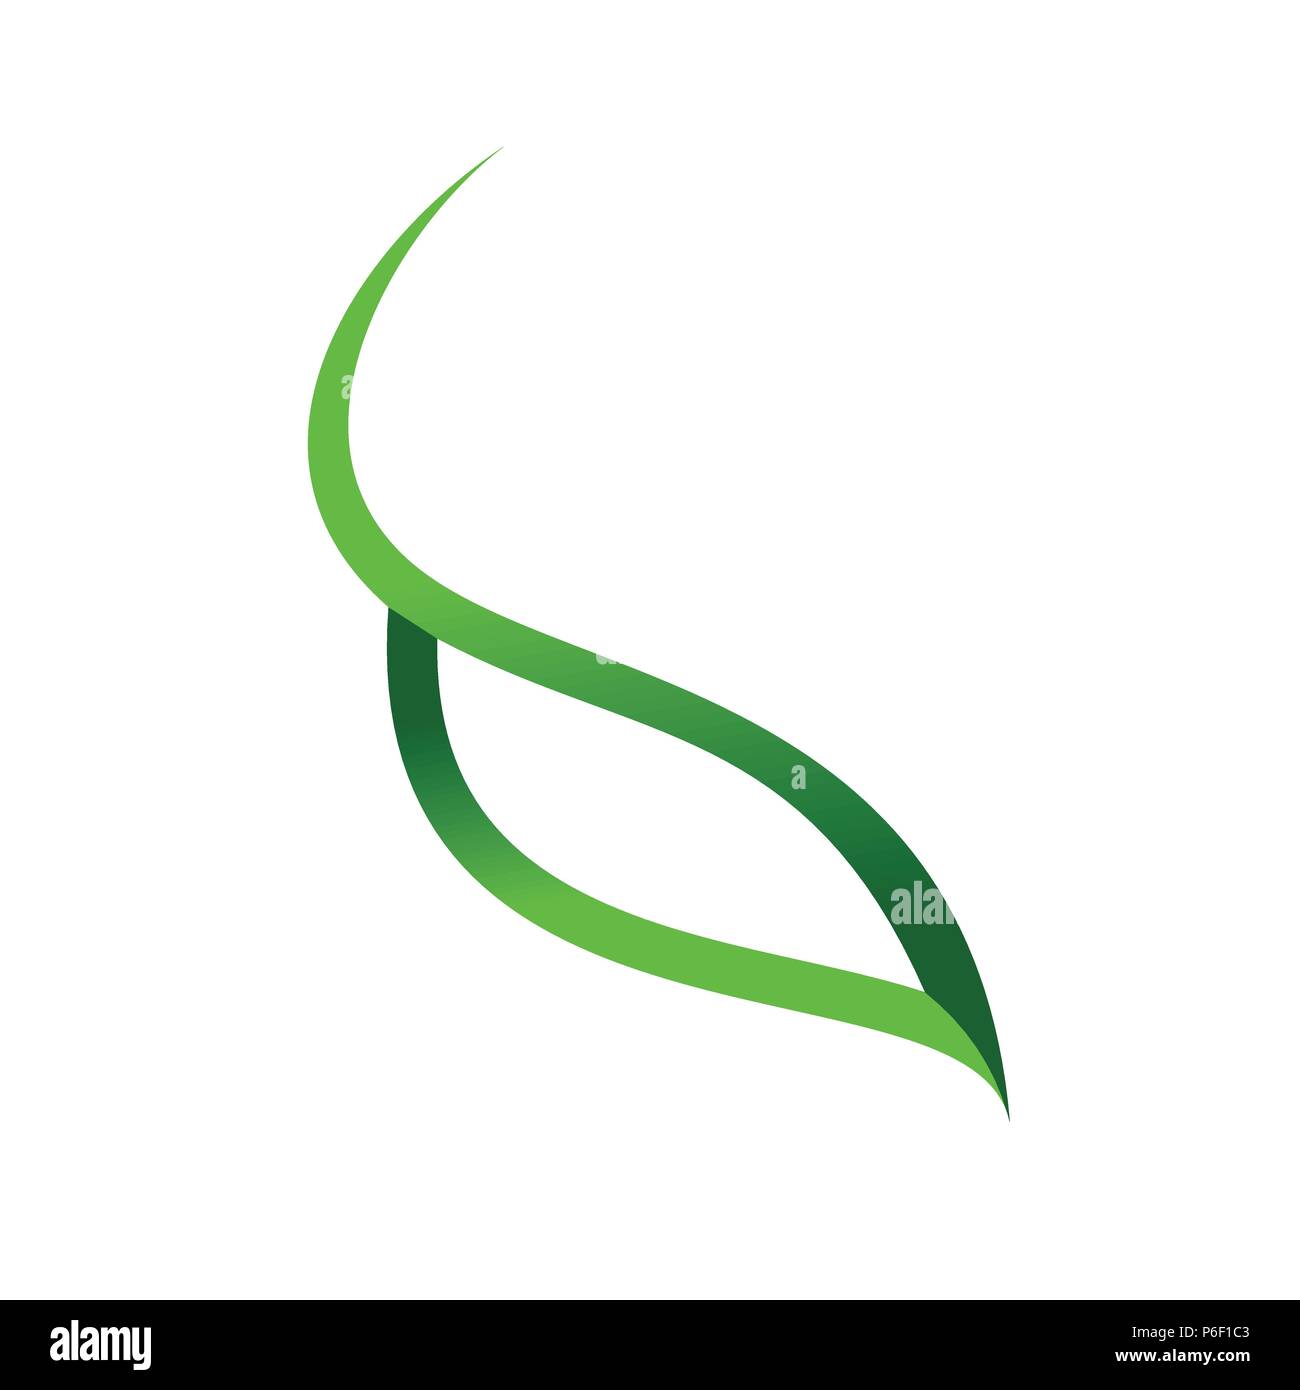 Swoosh Underline Isoleted Vector Stock Illustration - Download Image Now -  Squiggle, Drawing - Activity, Curve - iStock